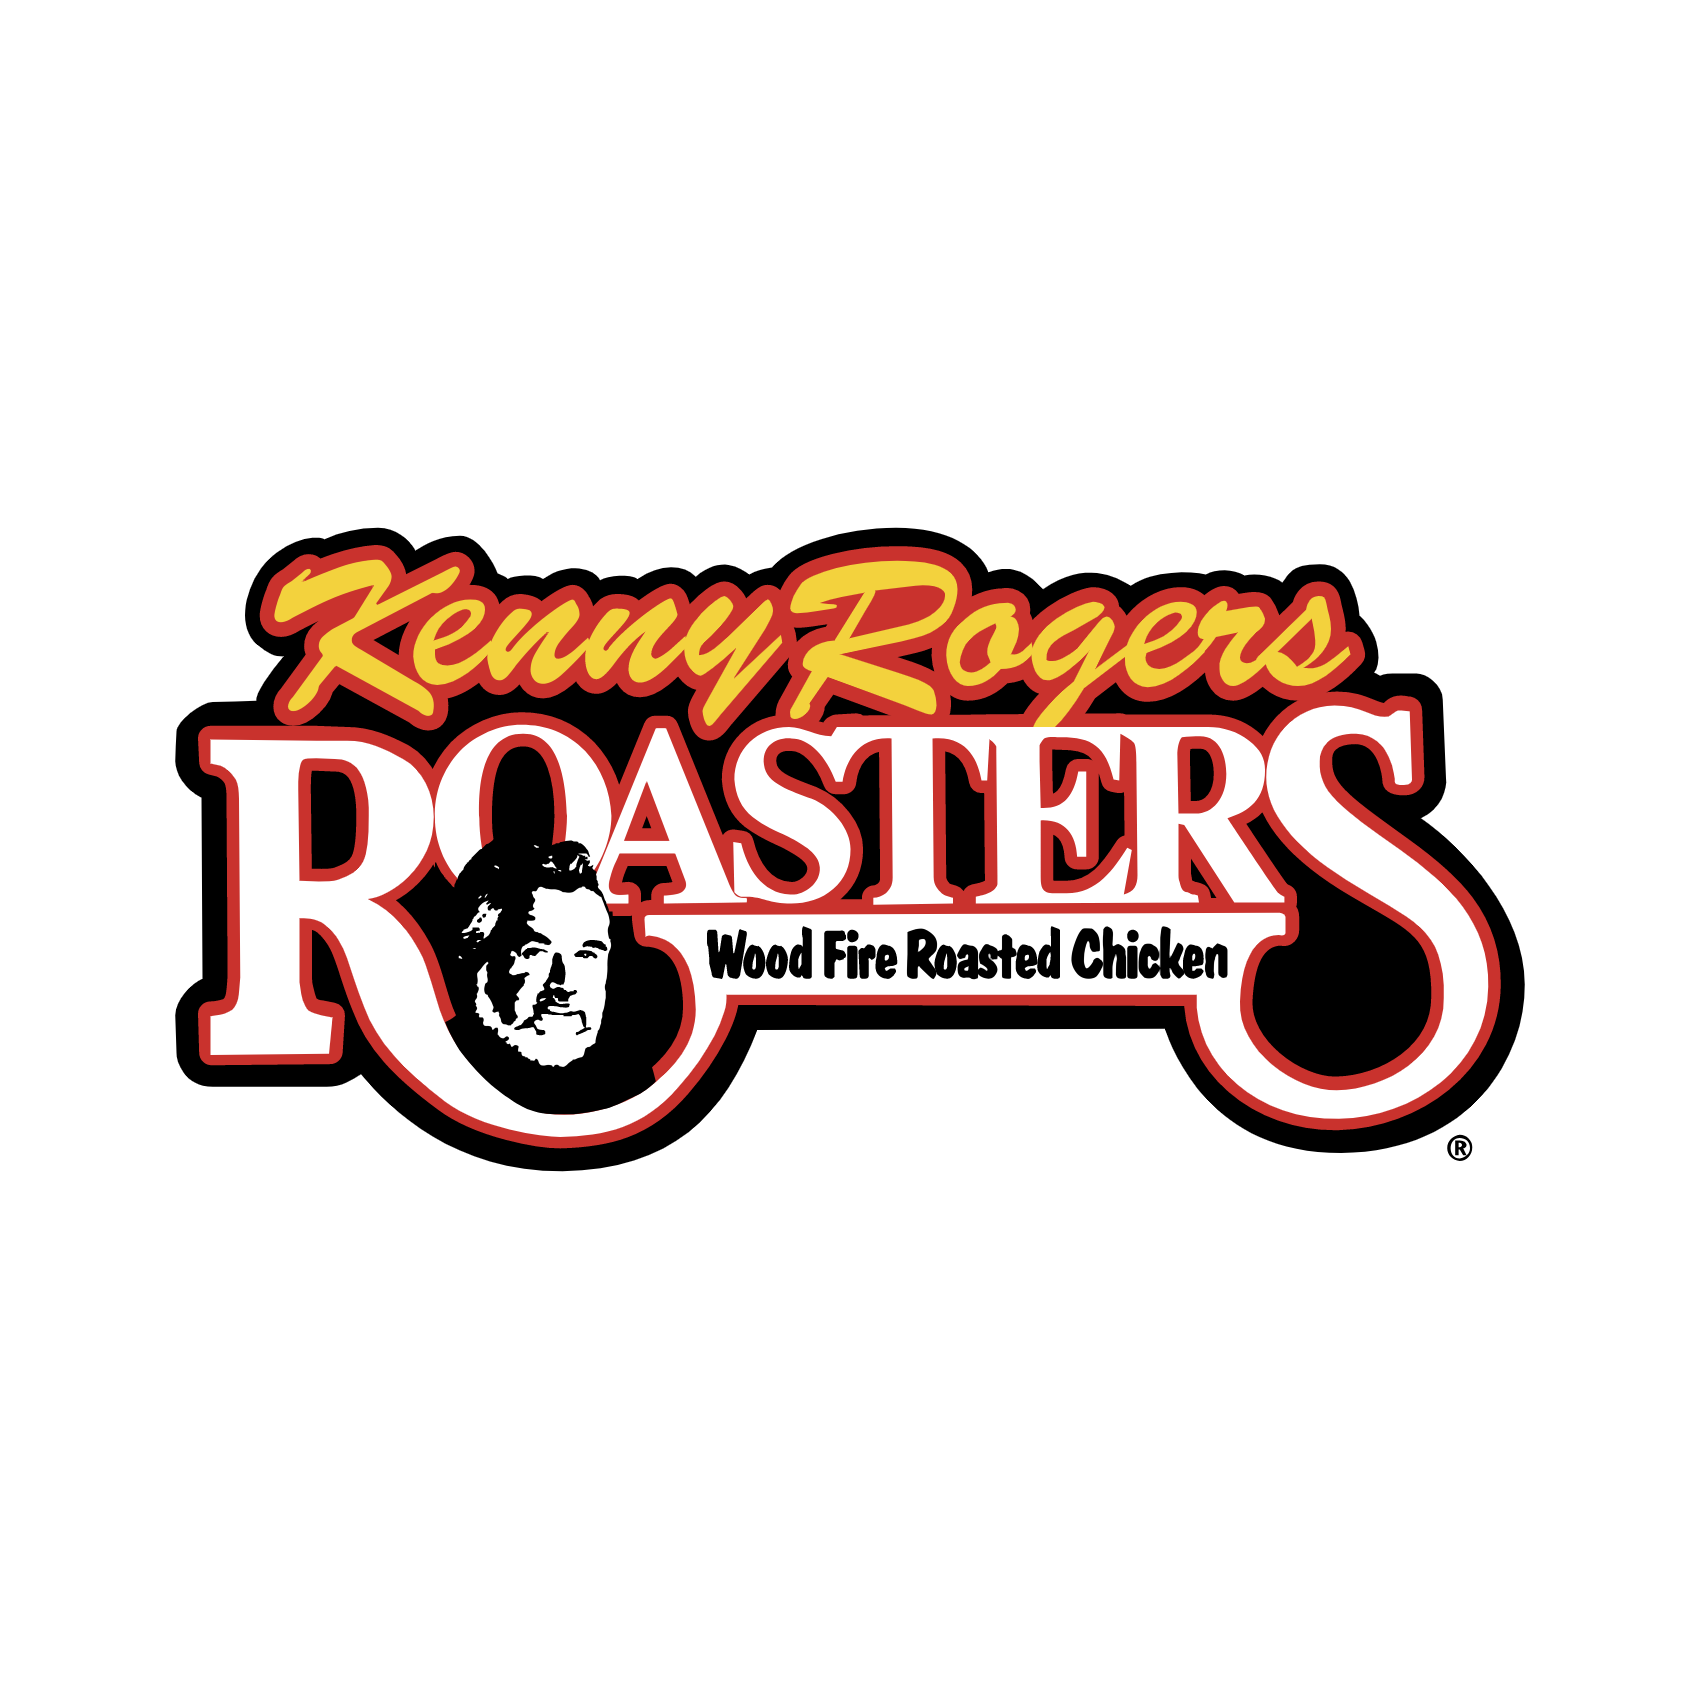 Download Kenny Rogers roasters Logo PNG and Vector (PDF, SVG, Ai, EPS) Free